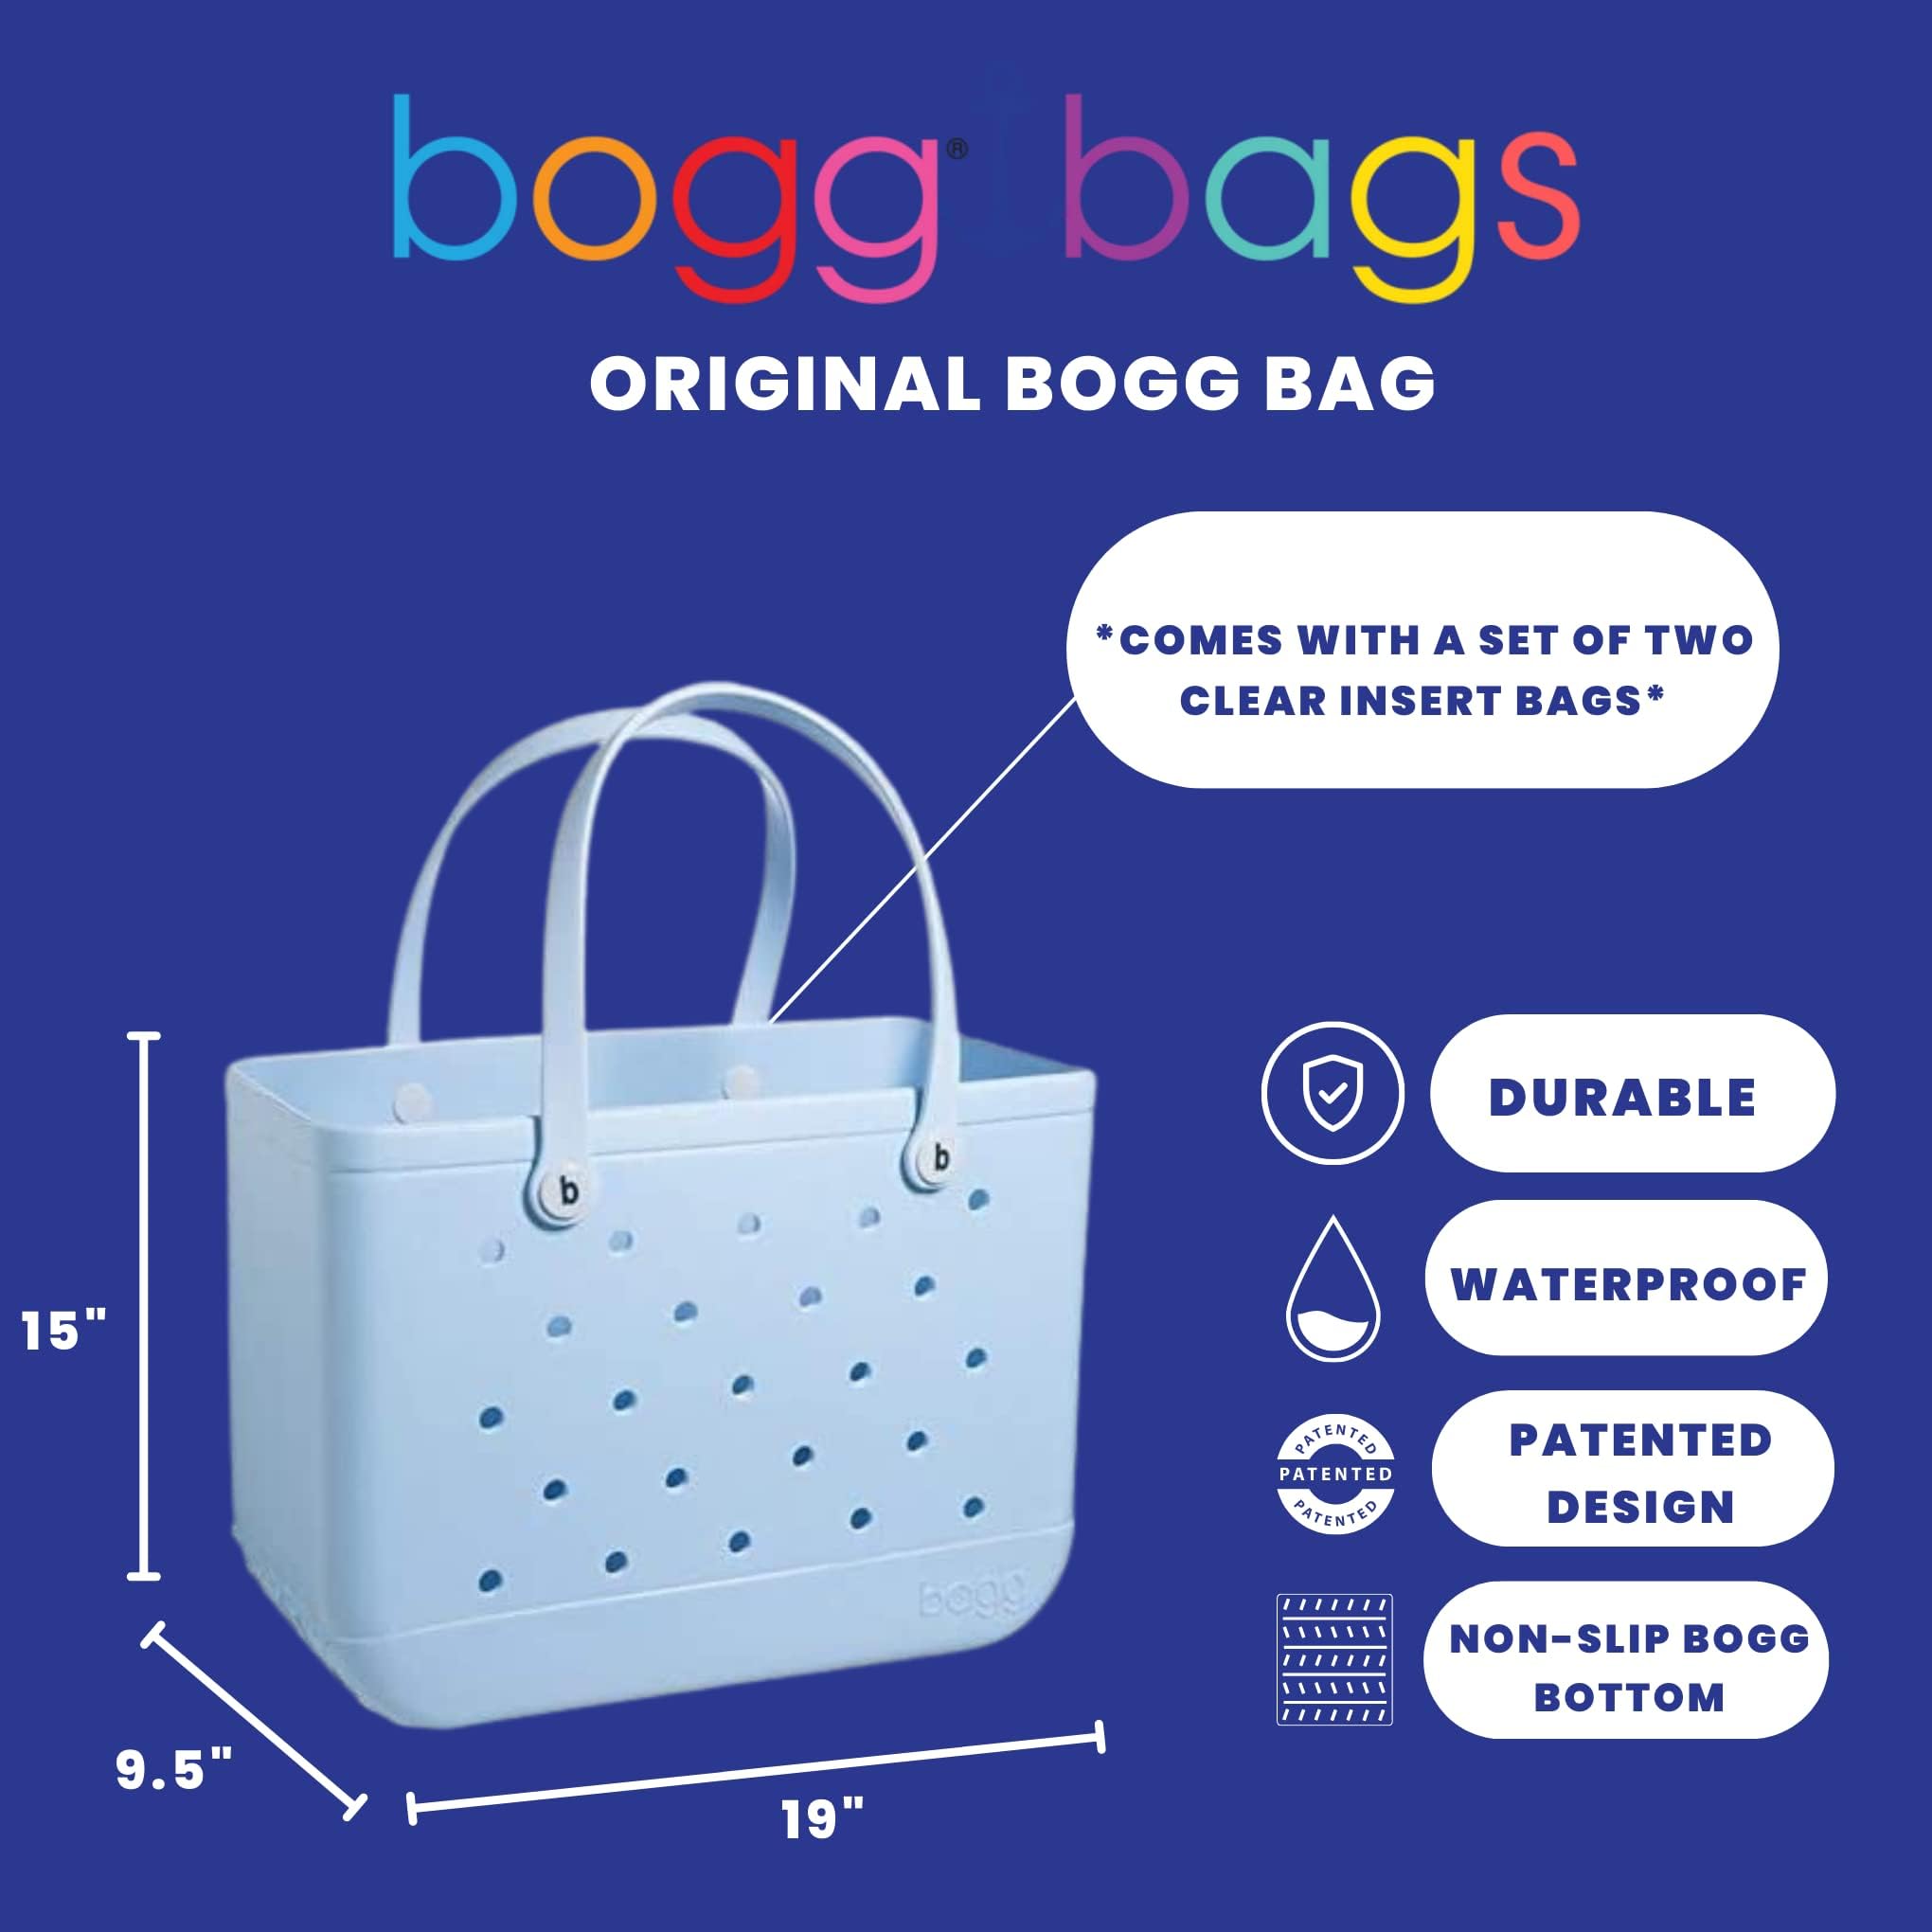 BOGG BAG Original X Large Waterproof Washable Tip Proof Durable Open Tote Bag for the Beach Boat Pool Sports 19x15x9.5